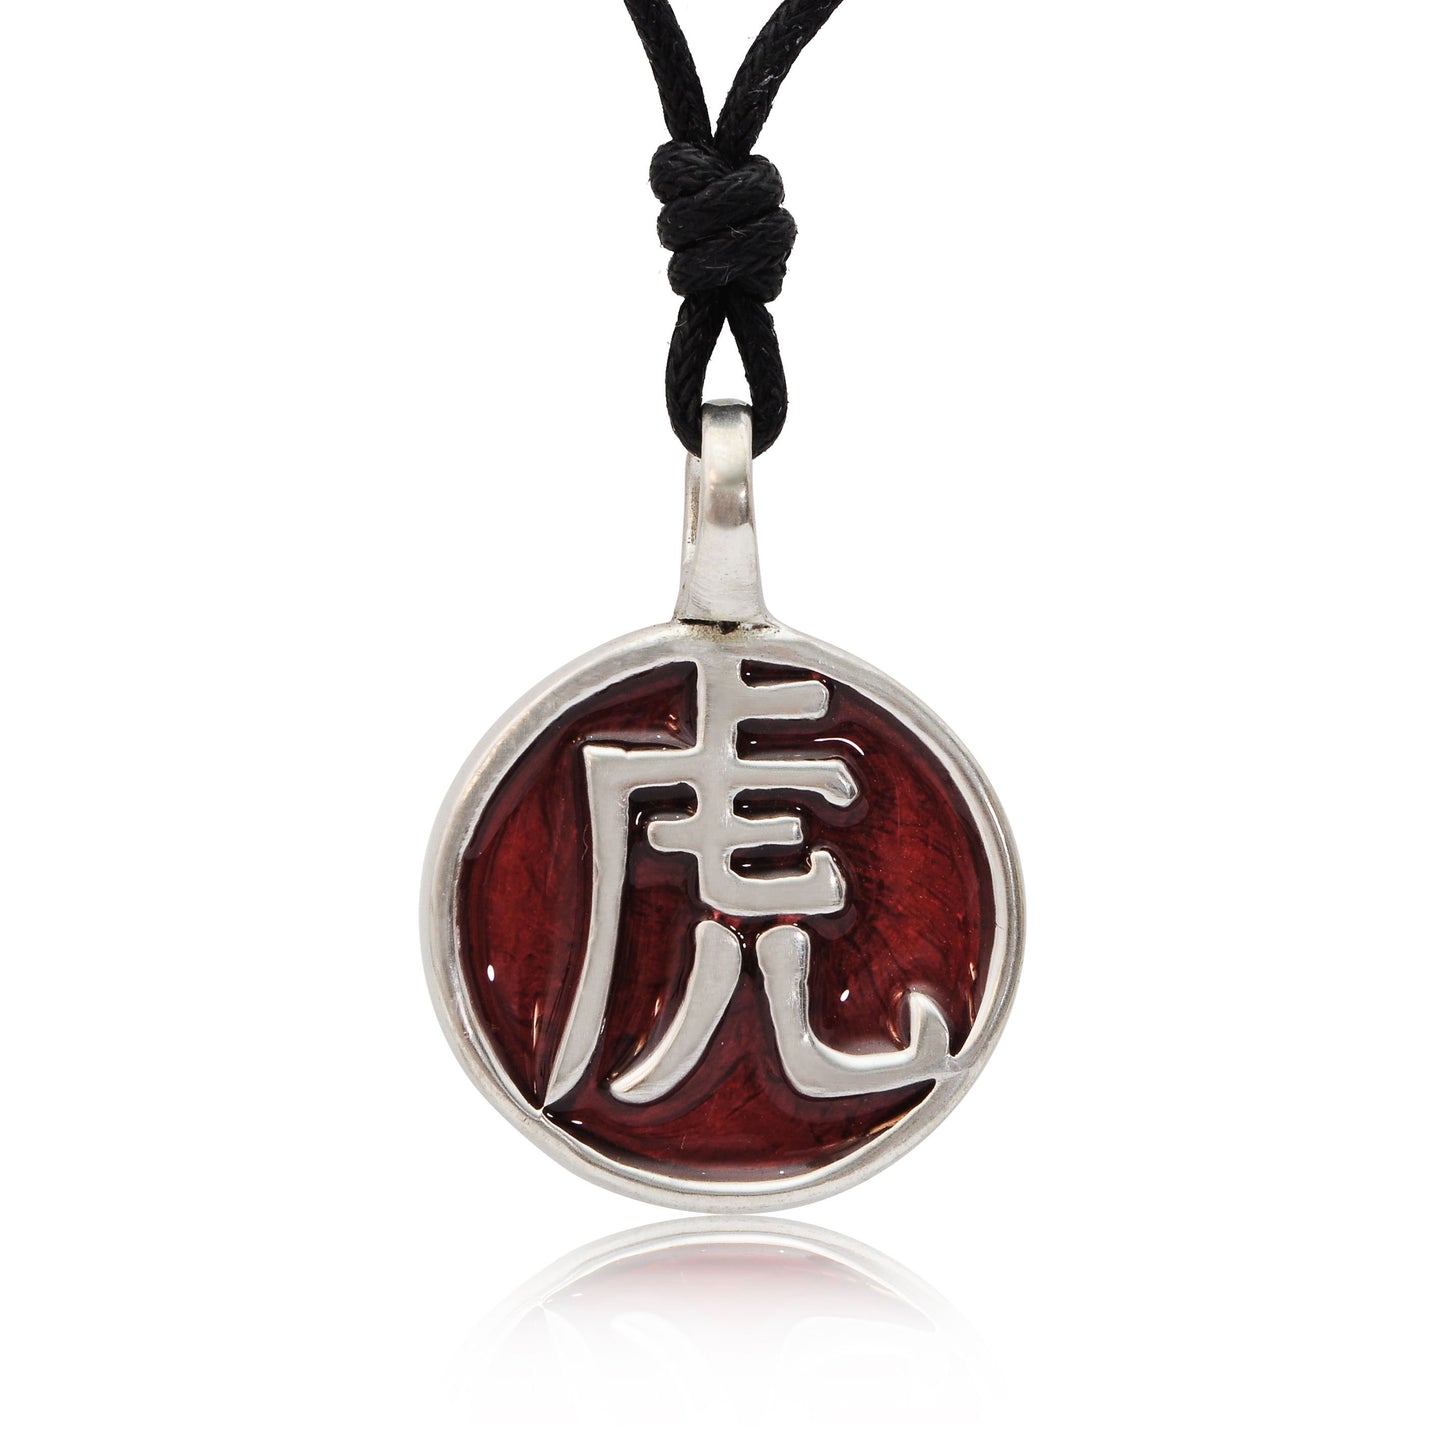 Chinese Year of the Tiger Zodiac Silver Pewter Charm Necklace Pendant Jewelry